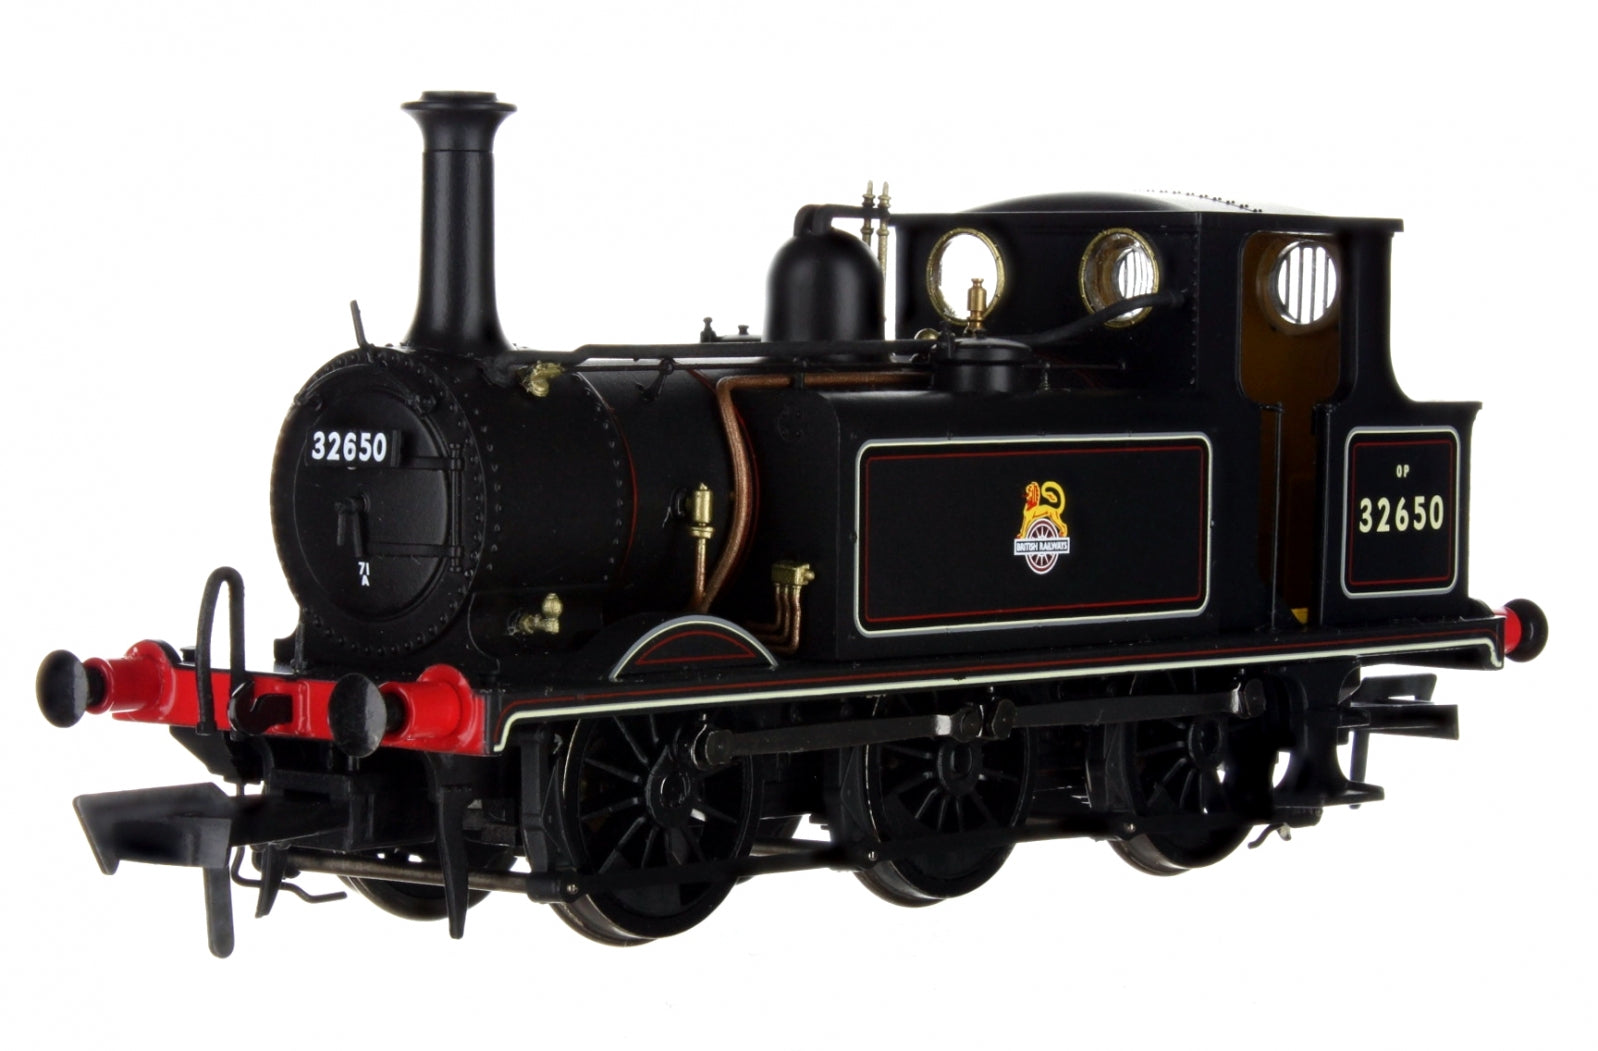 4S-010-012 OO Gauge Terrier A1X 32650 B R Lined Black E/Crest Ex Isle of Wight